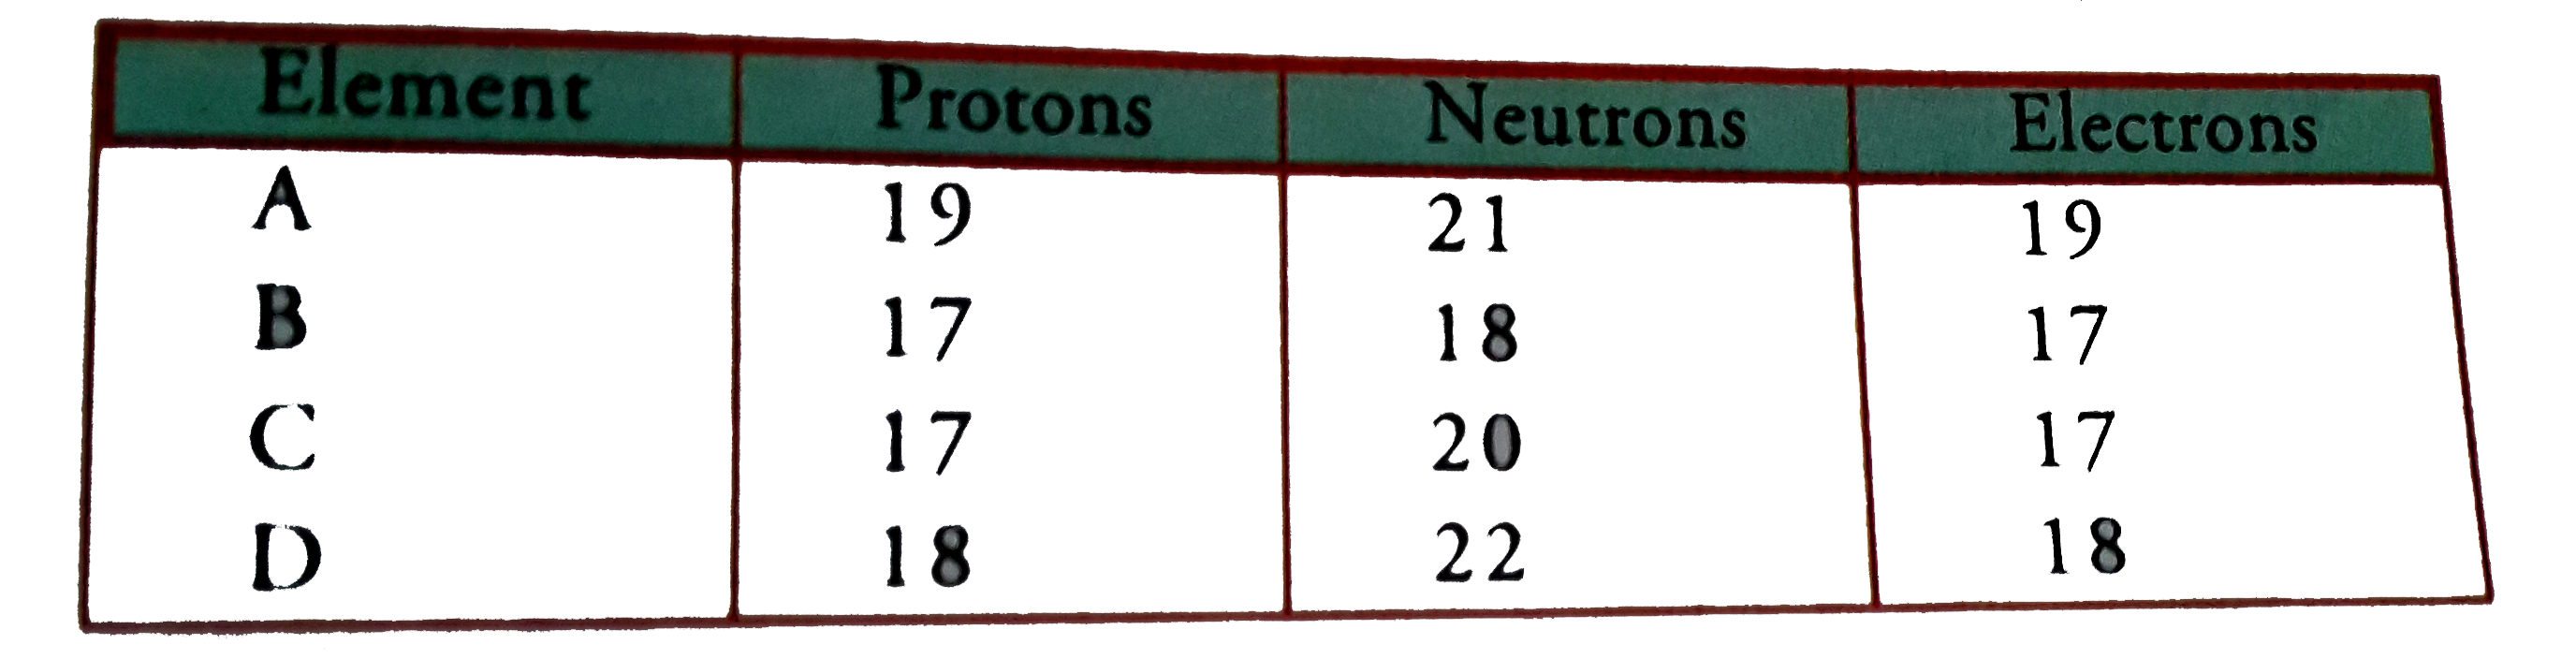 The following data repersents the distribution of electons protons and neutrons in atoms of four element AltBltCltD      Answer the following questions:   (a)Describe the electronic distrubution in atom of element B. , (b) Is elements B a metal or a  non metal? why ?   (c ) which two elements form a pair of isotopes?  ,(d) which two element form in pair of iosbars?